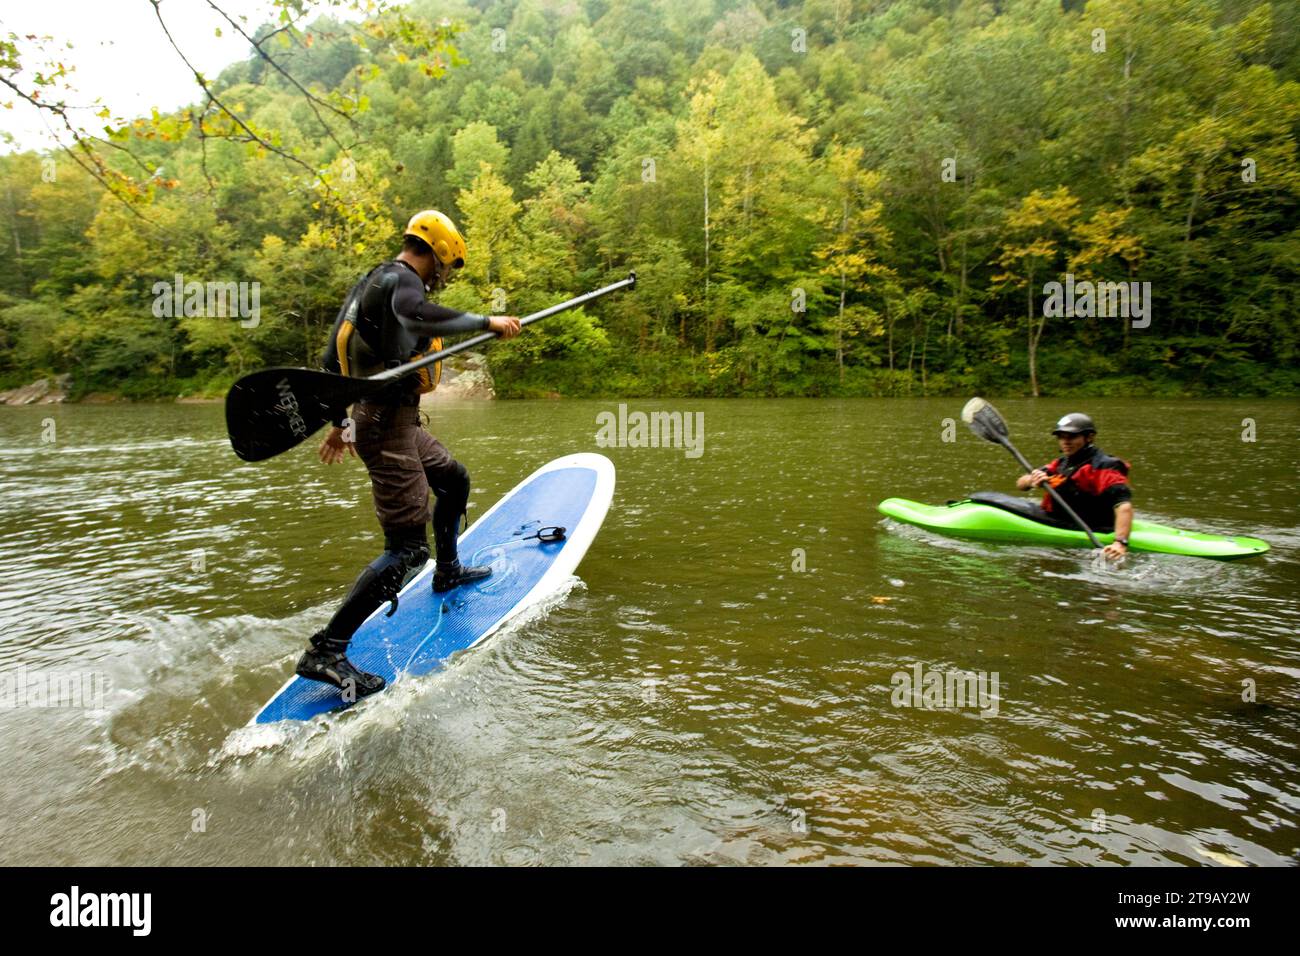 Male stand up paddleboarder jumping onto his board in a river while a kayaker watches. Stock Photo